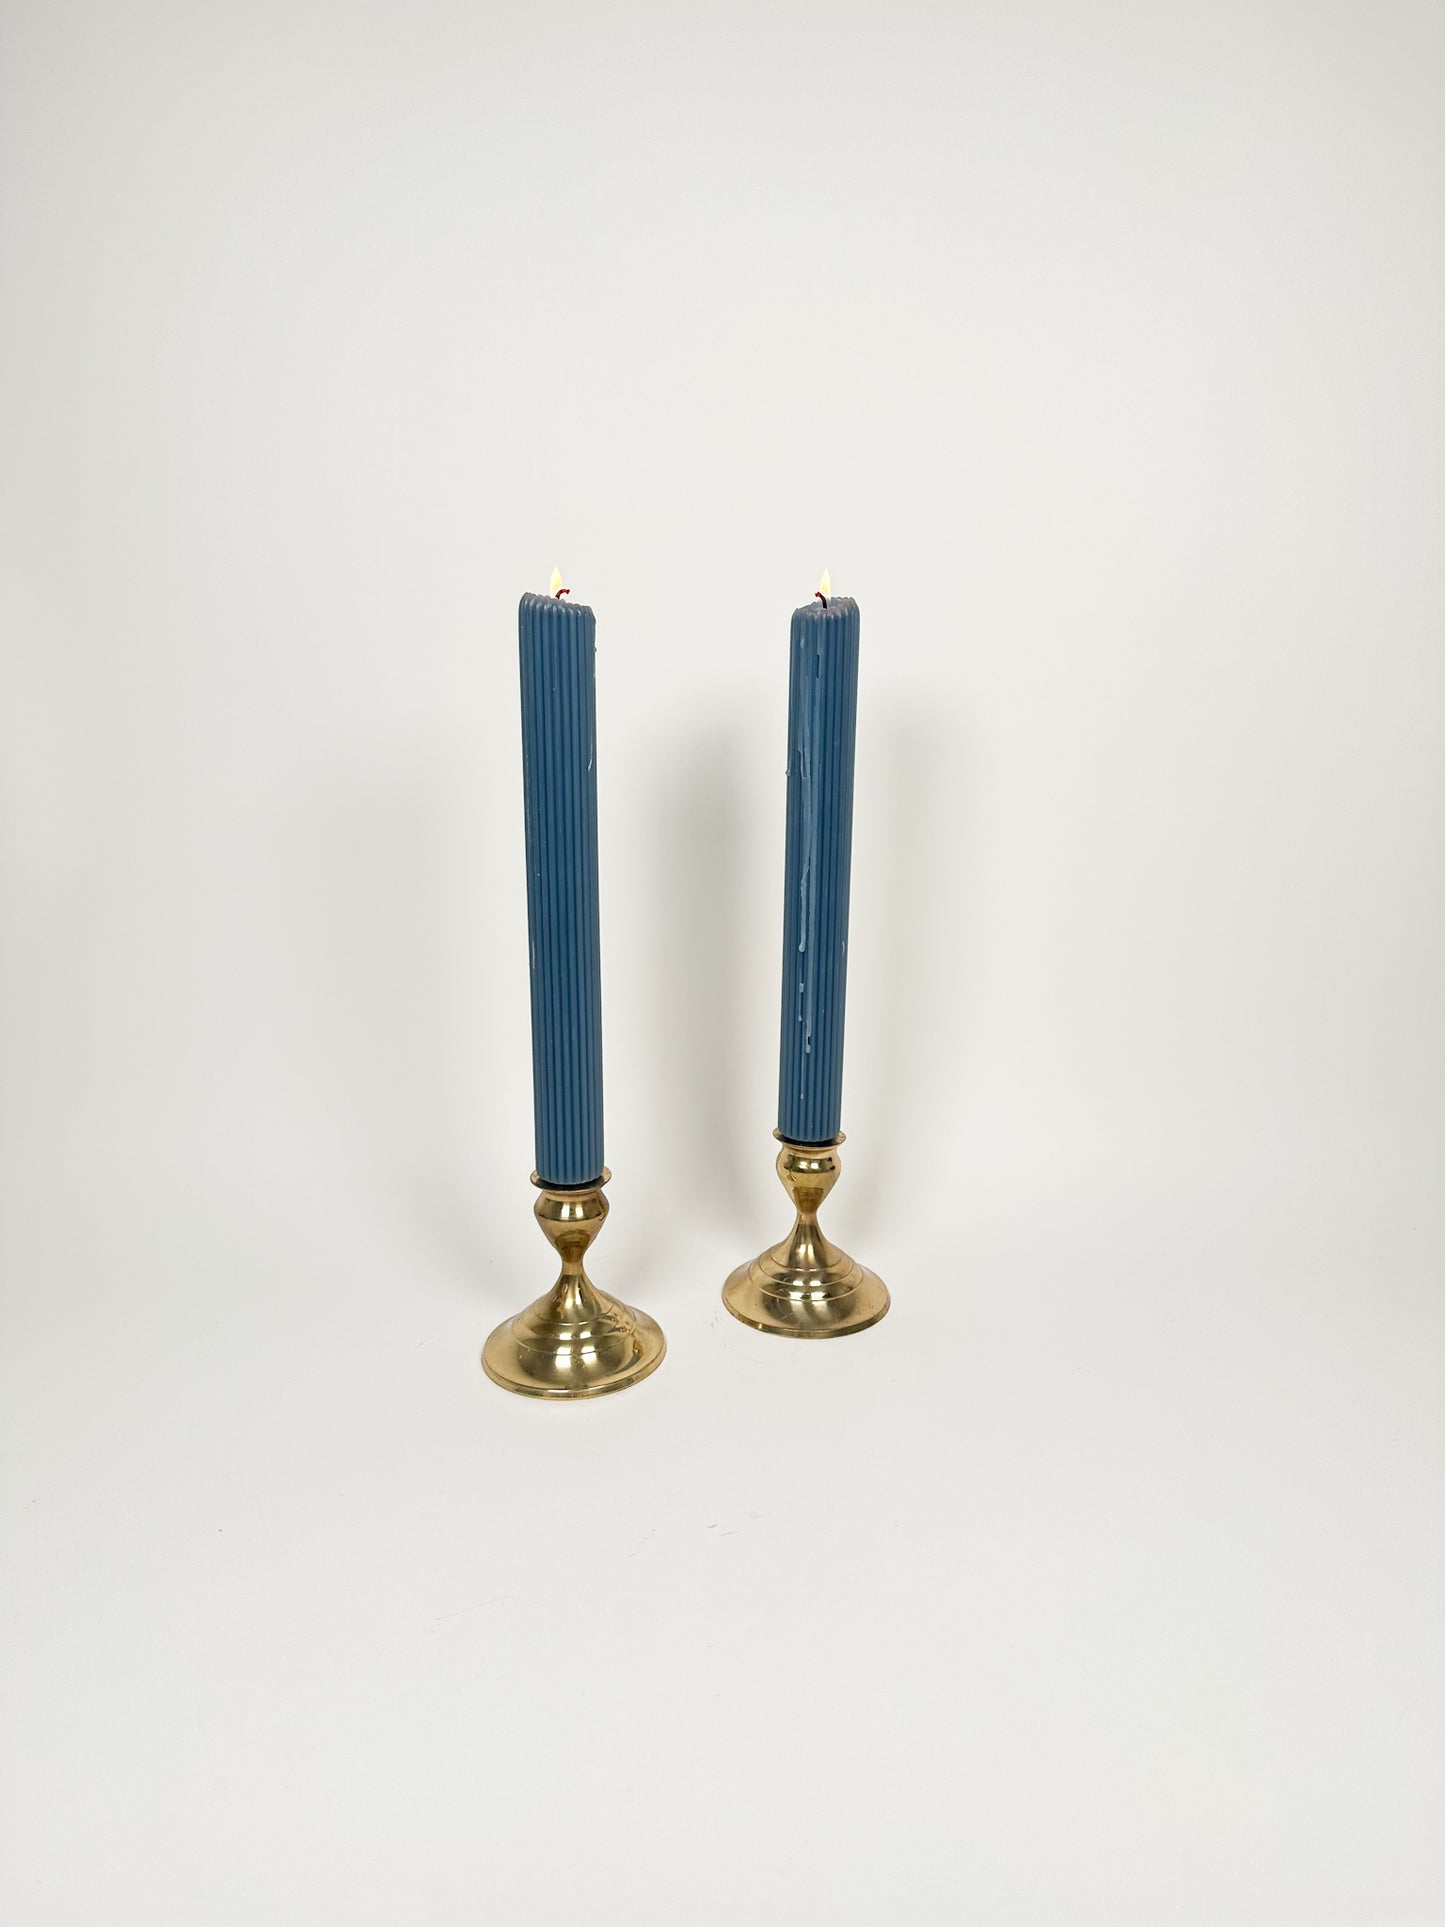 Petite Brass Candle Holders